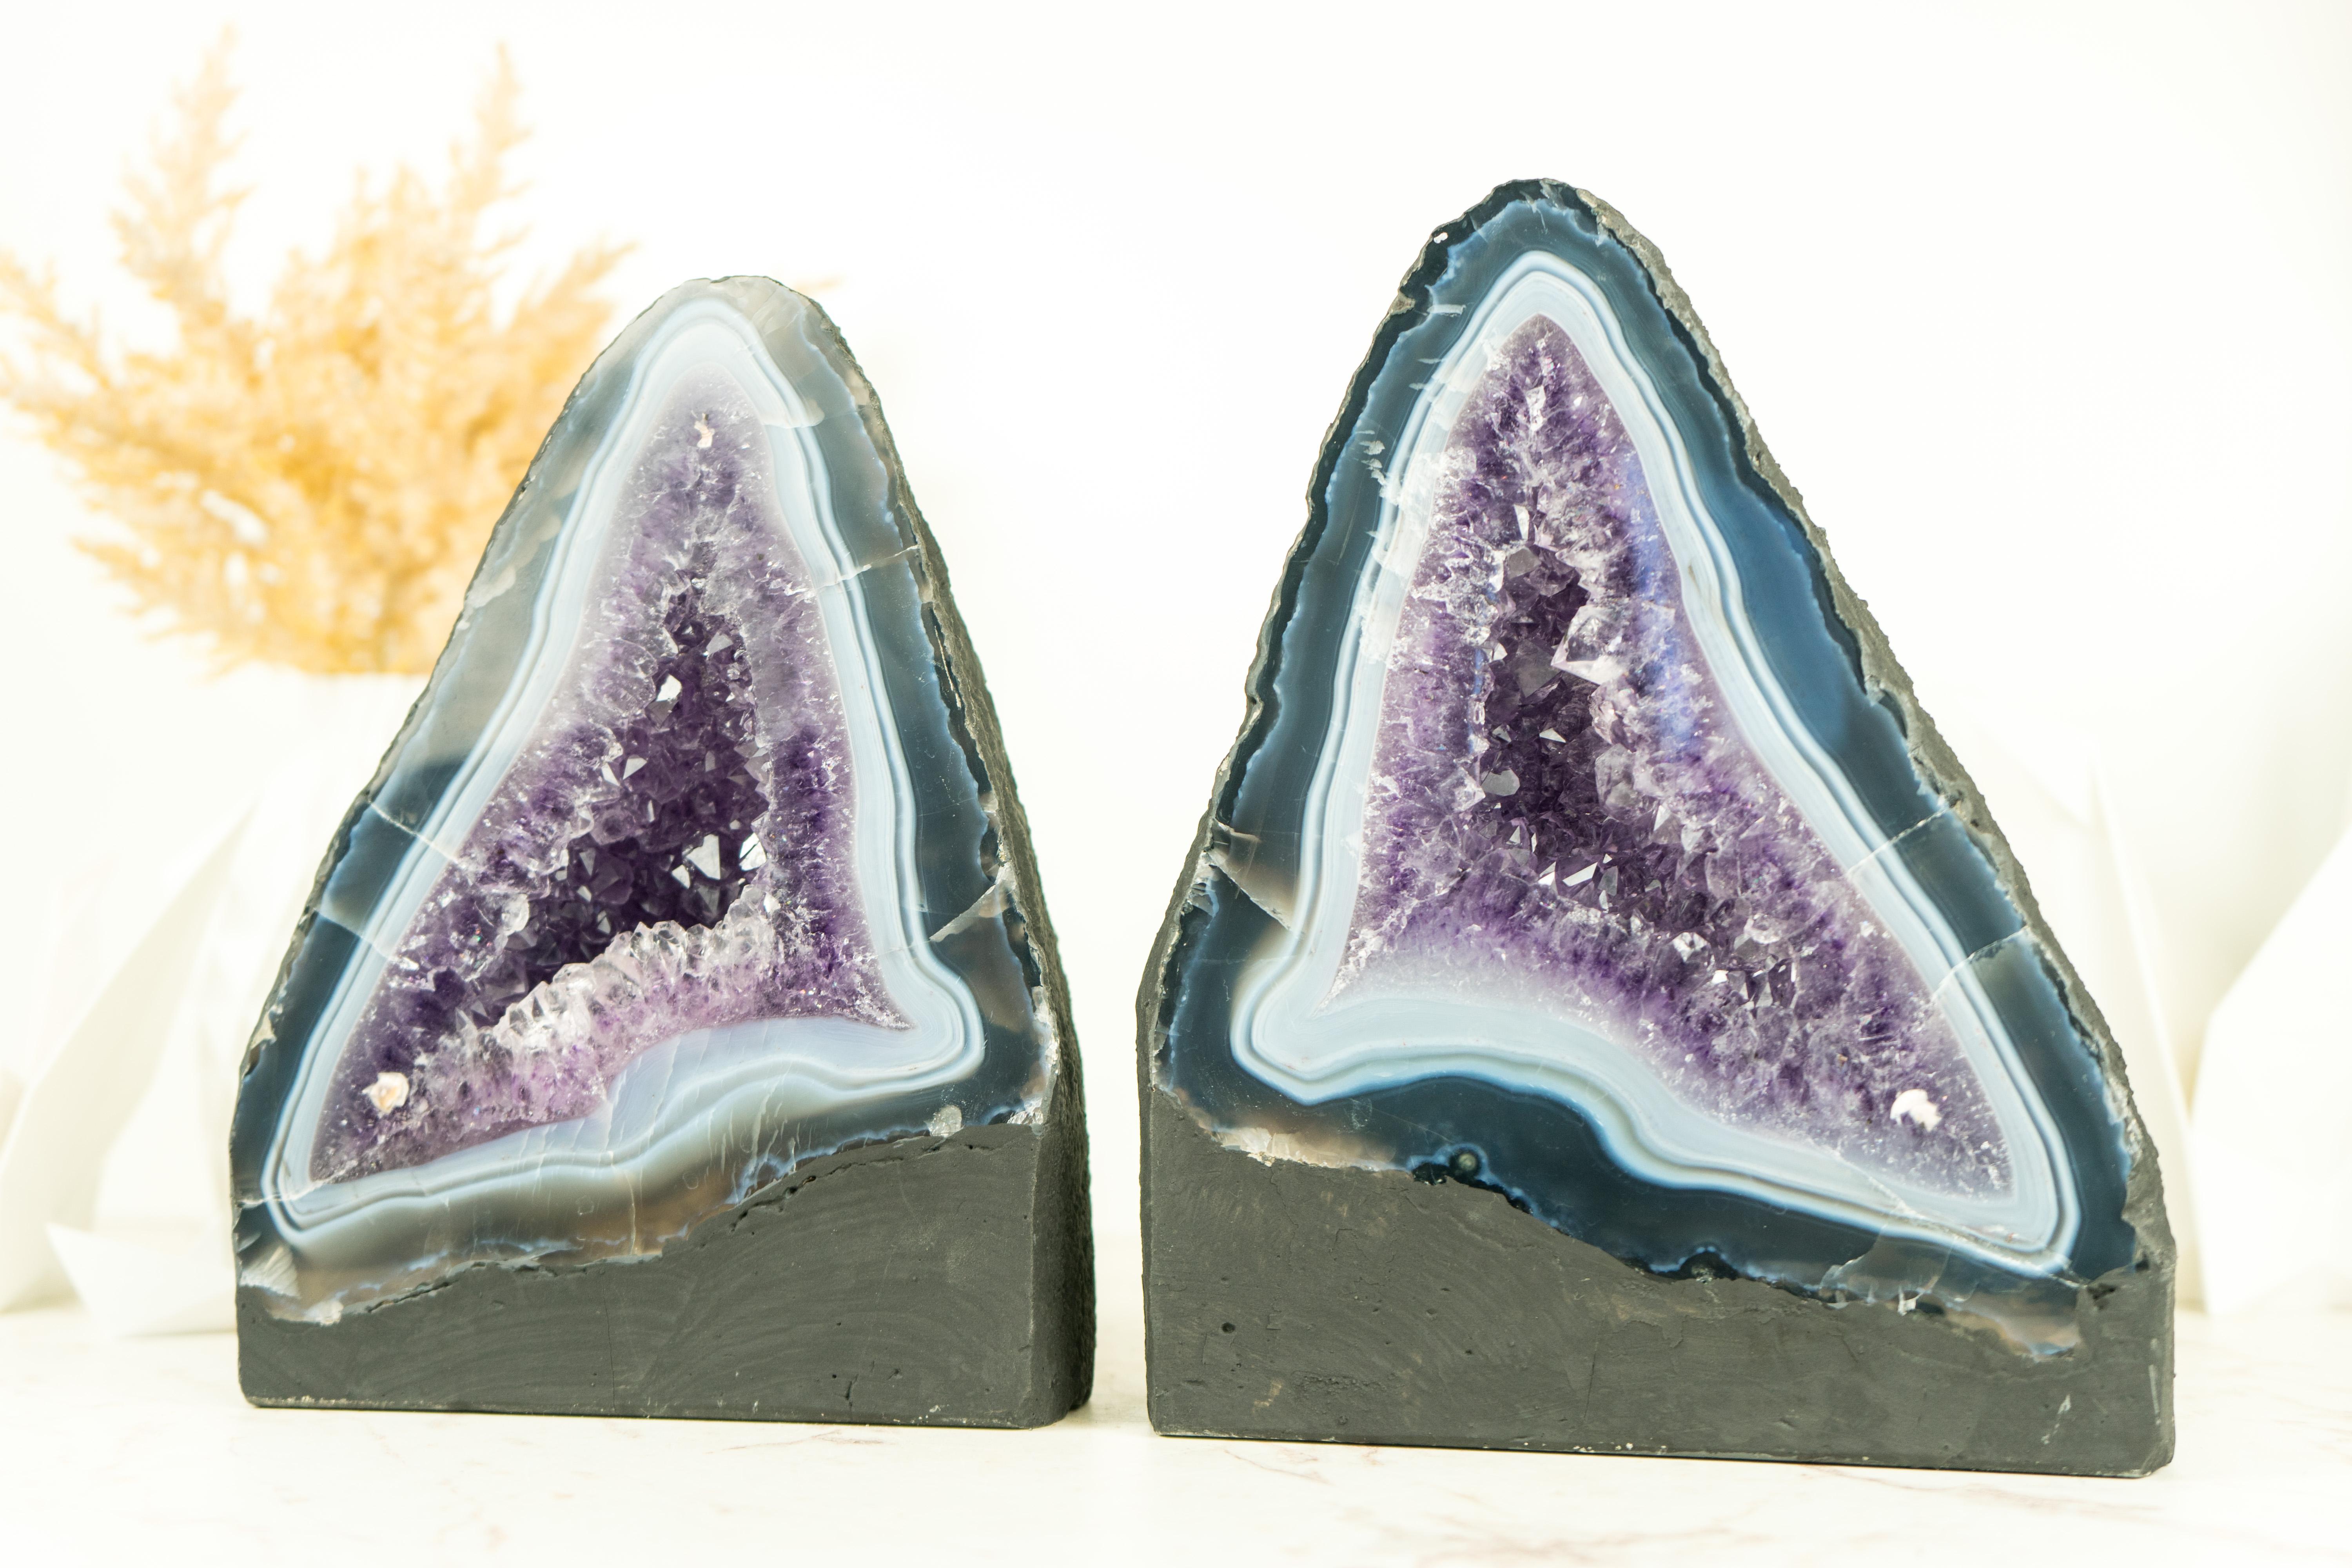 Pair of Book-Matching Blue Lace Agate Geodes with Crystal Amethyst For Sale 9